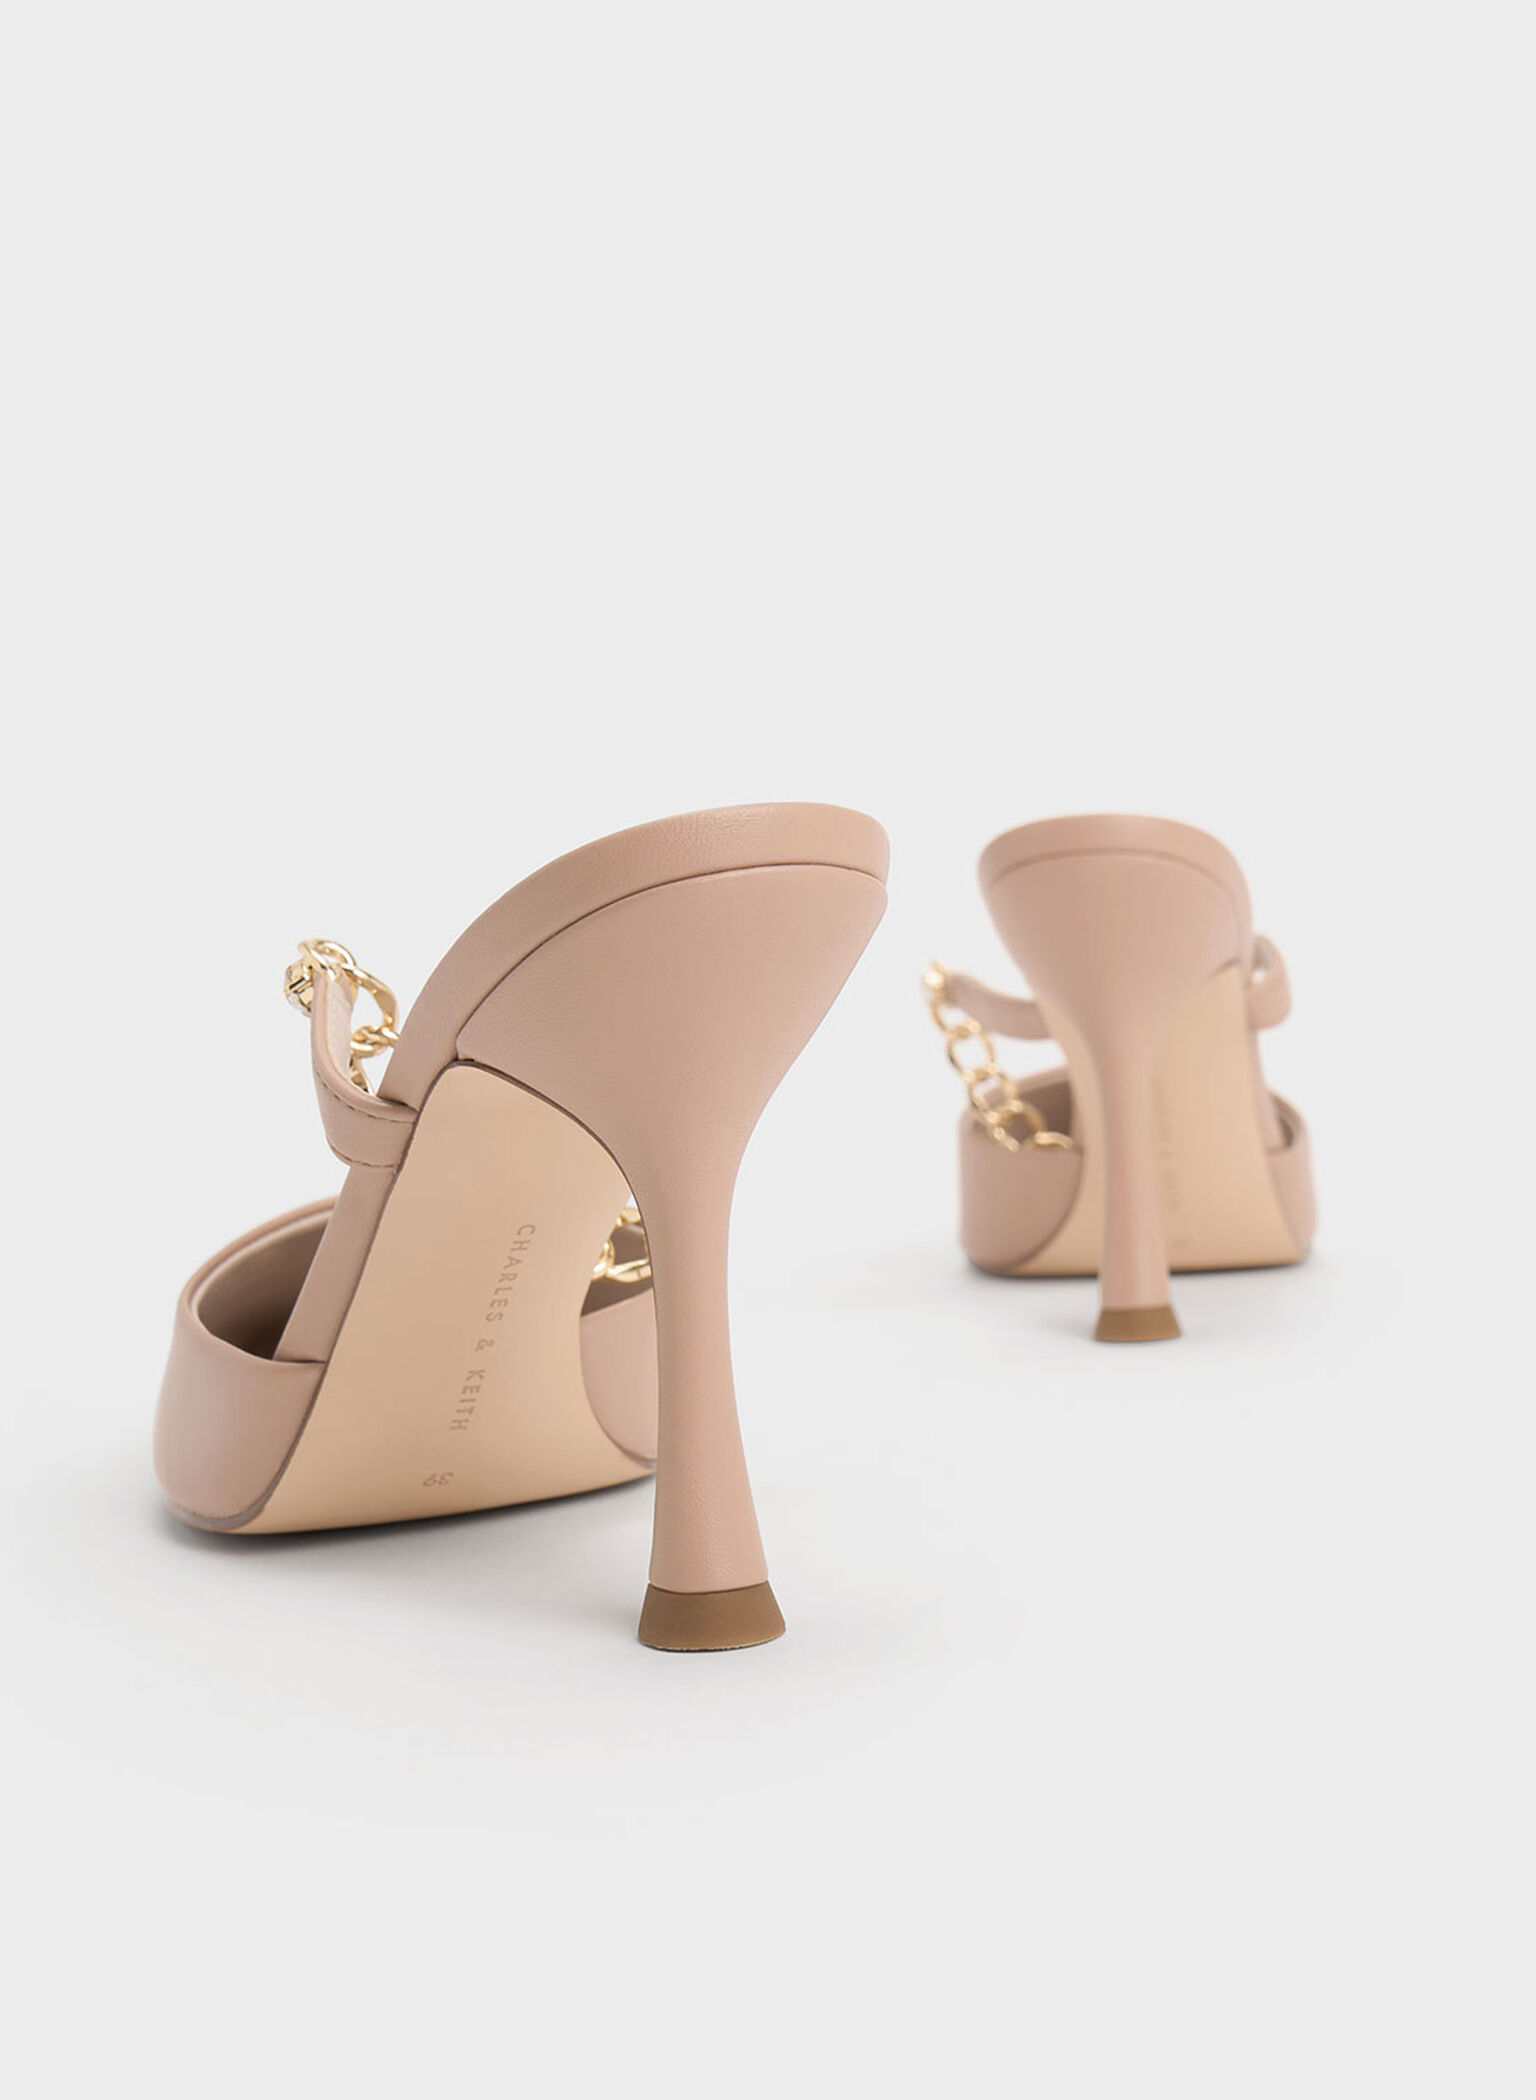 Chain-Link Strap Heeled Mules, Nude, hi-res